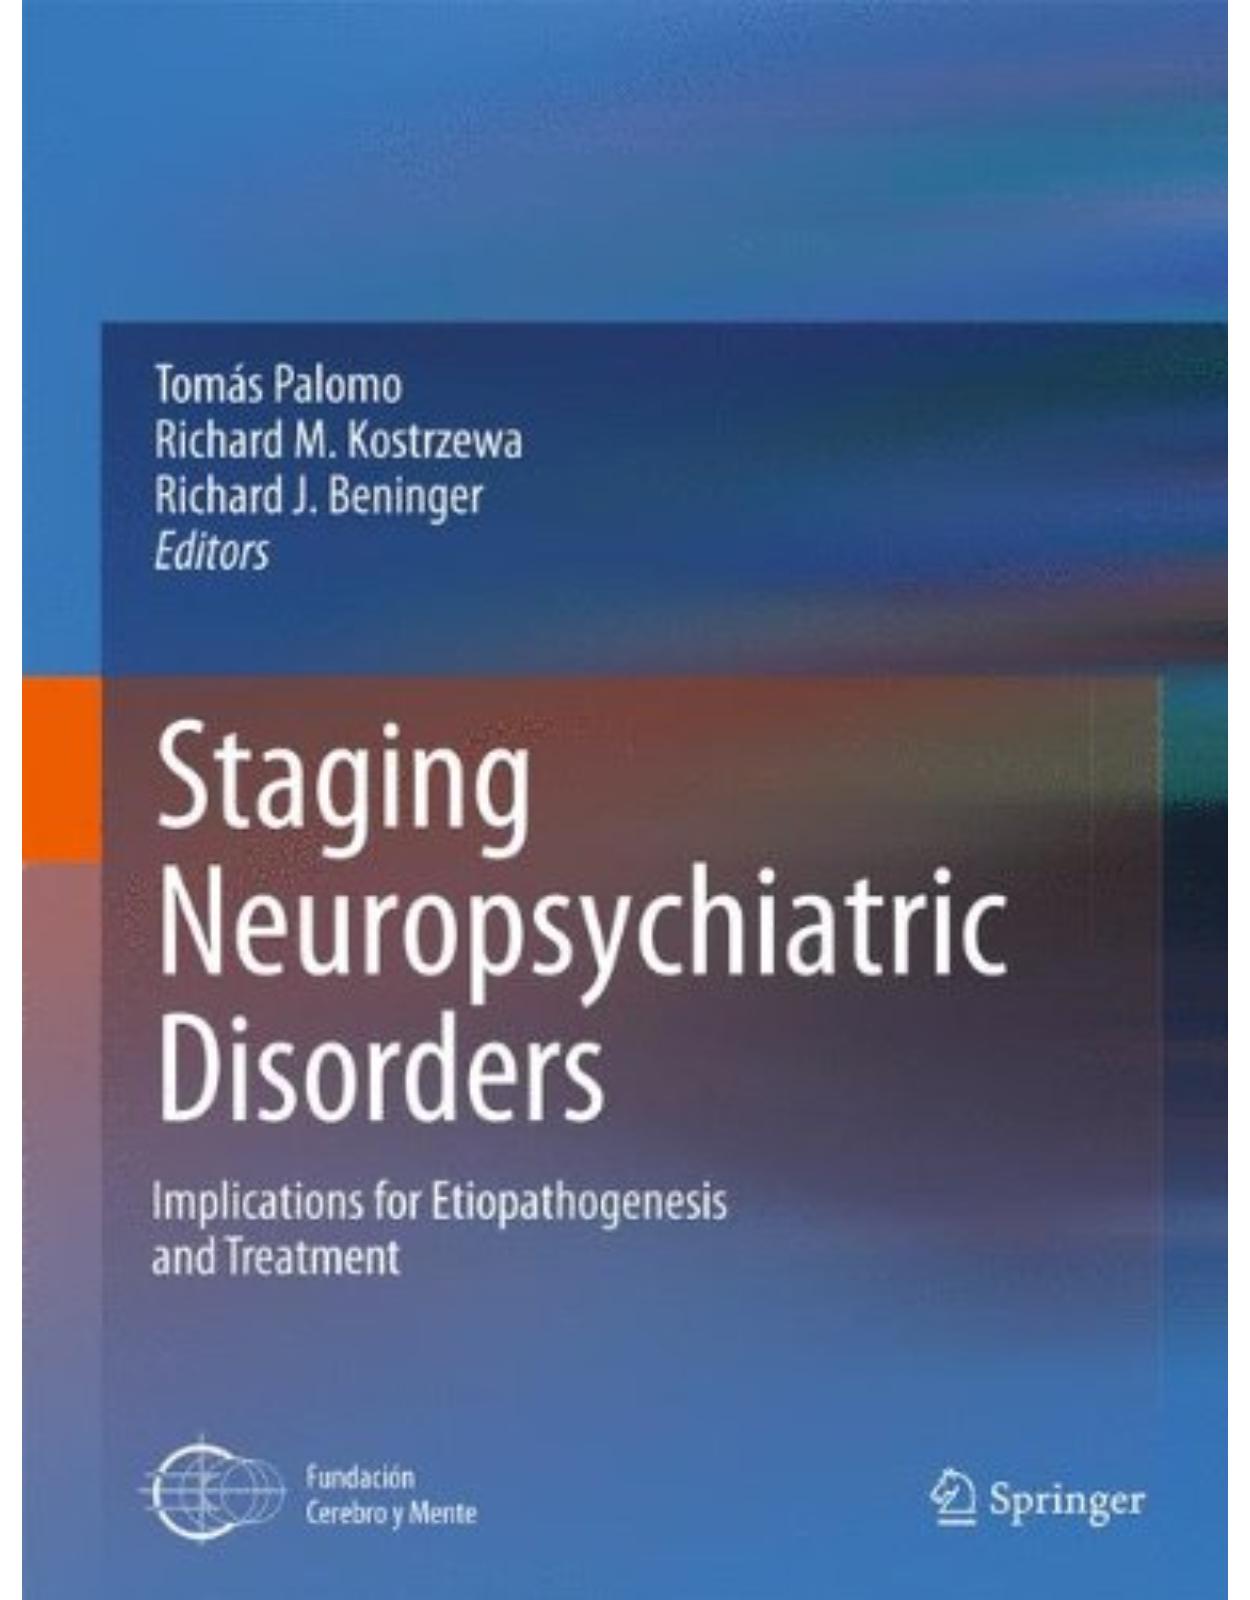 Staging Neuropsychiatric Disorders: Implications for Etiopathogenesis and Treatment (Current Topics in Neurotoxicity) 